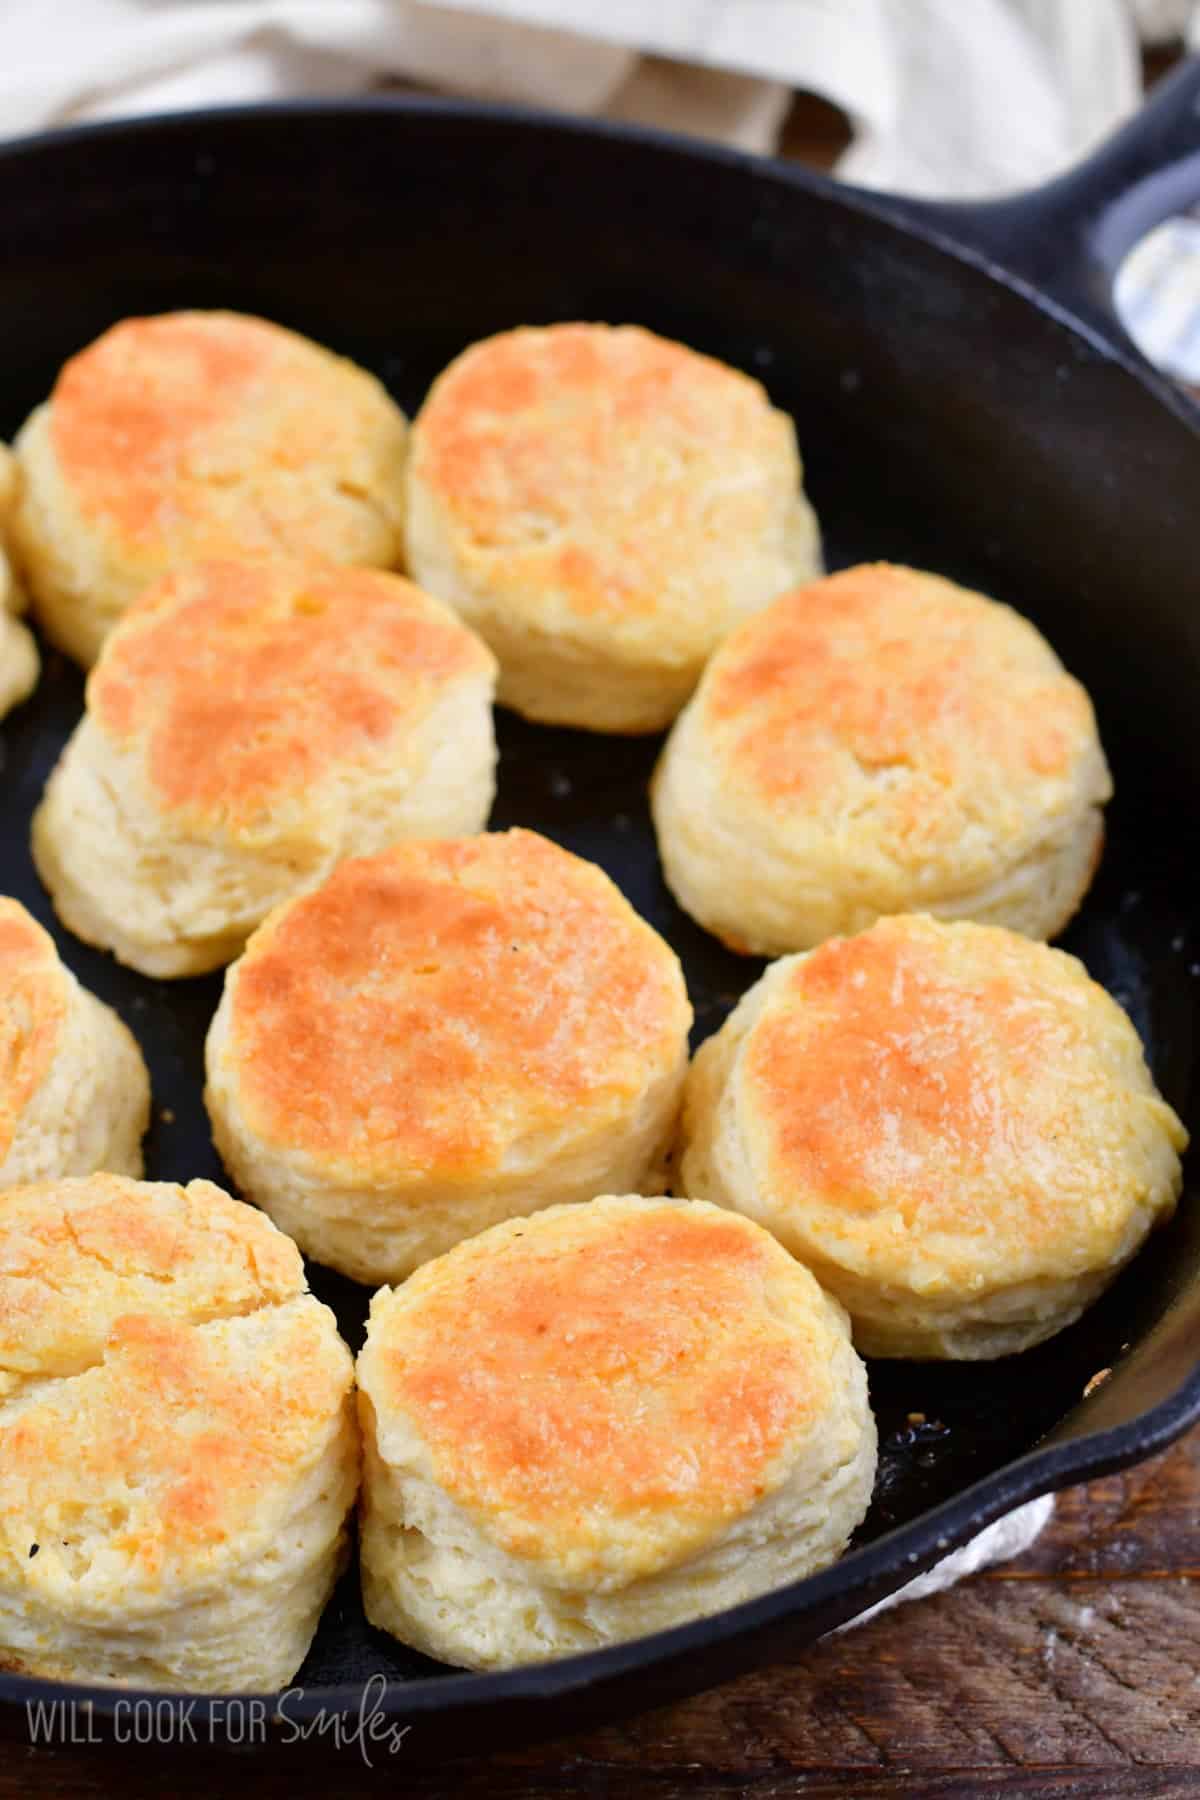 biscuits cooked in a cast iron skillet.